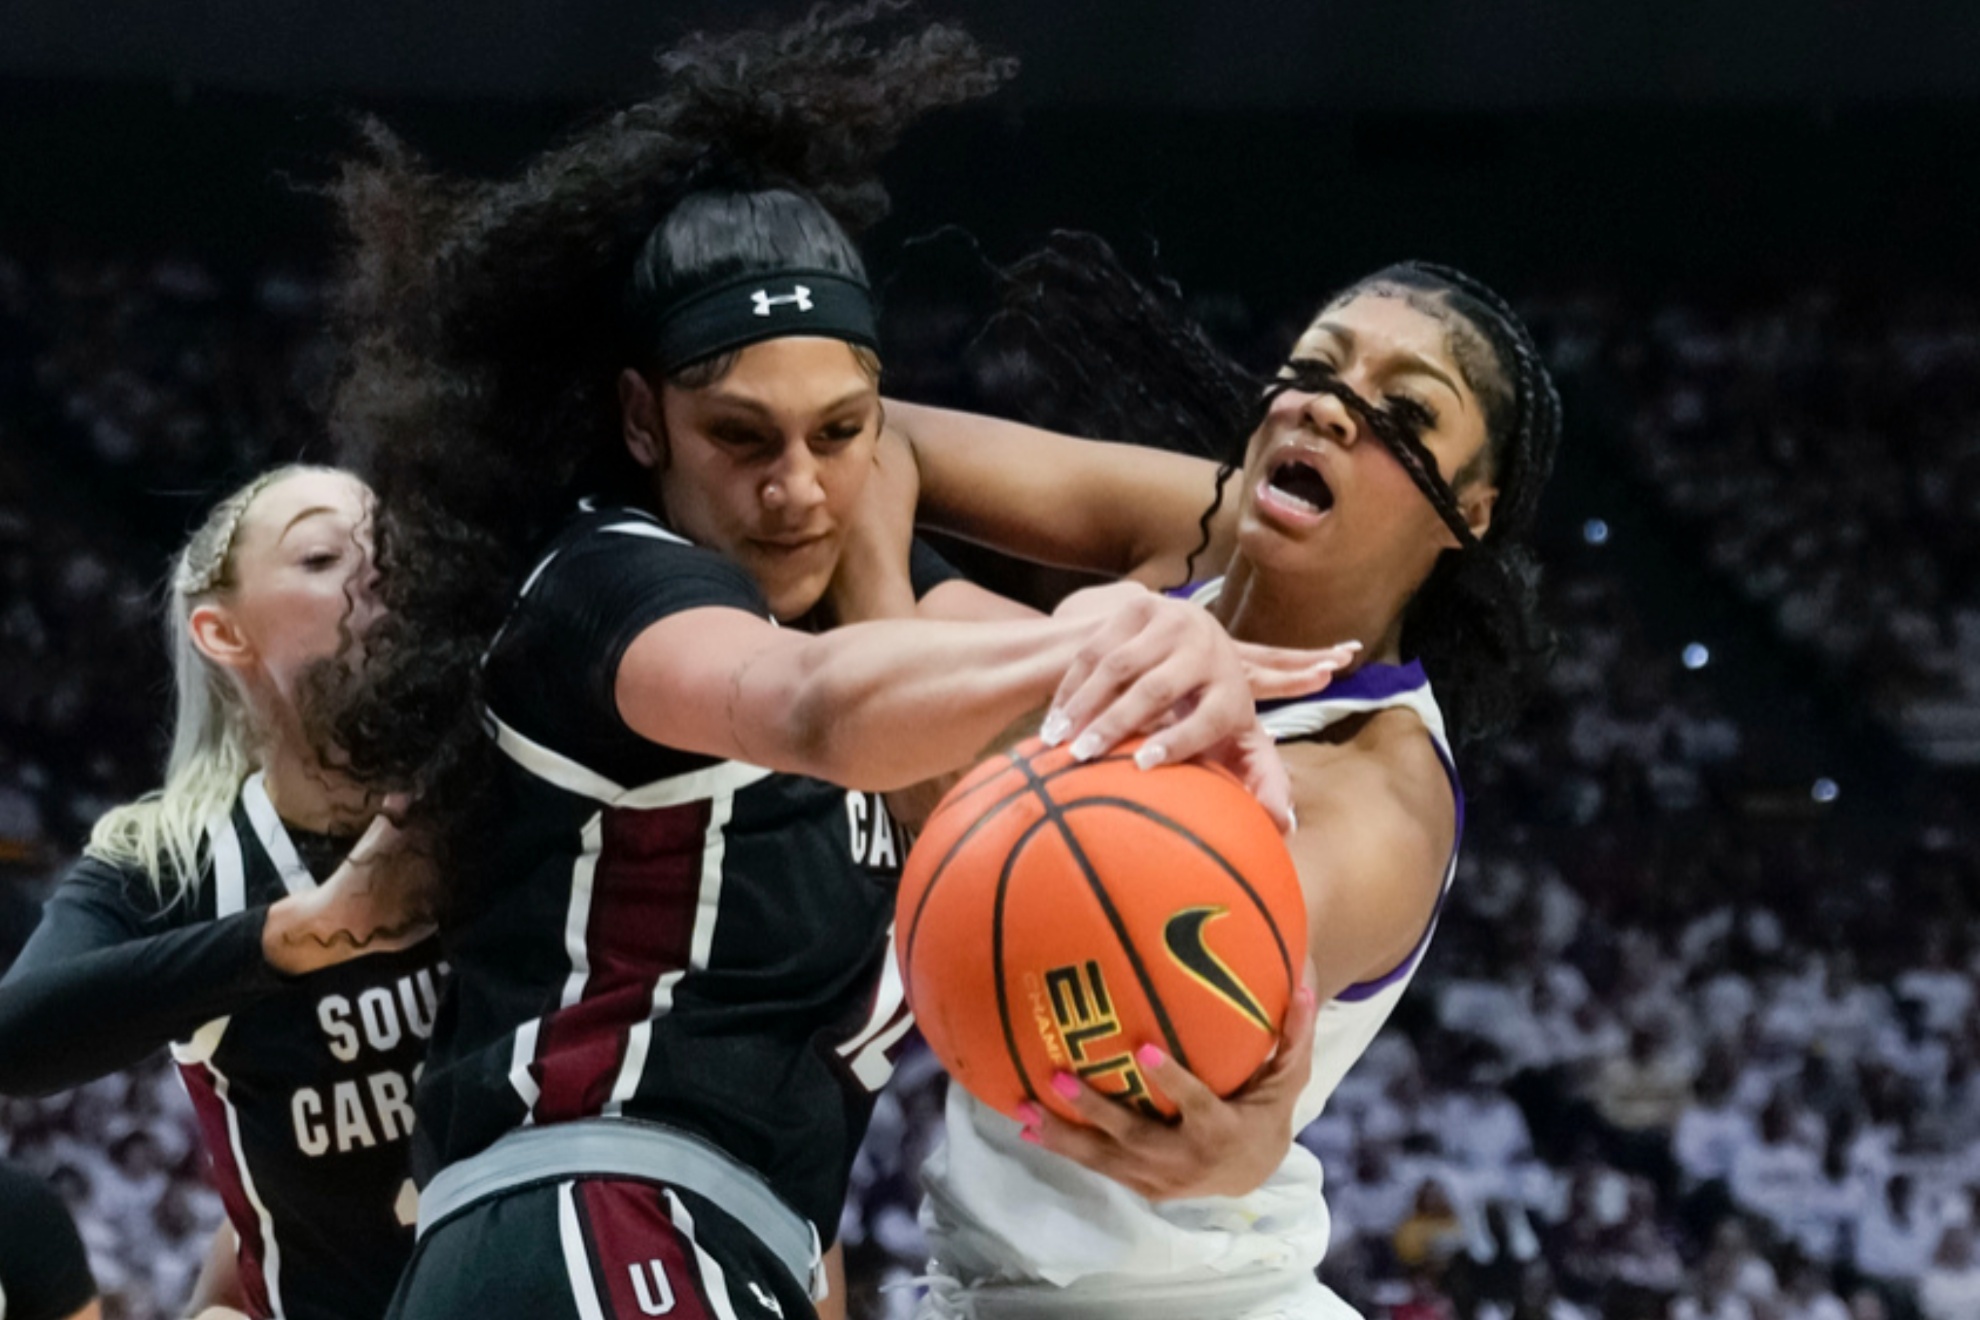 South Carolina remains unbeaten after thrilling showdown with LSU and Angel Reese